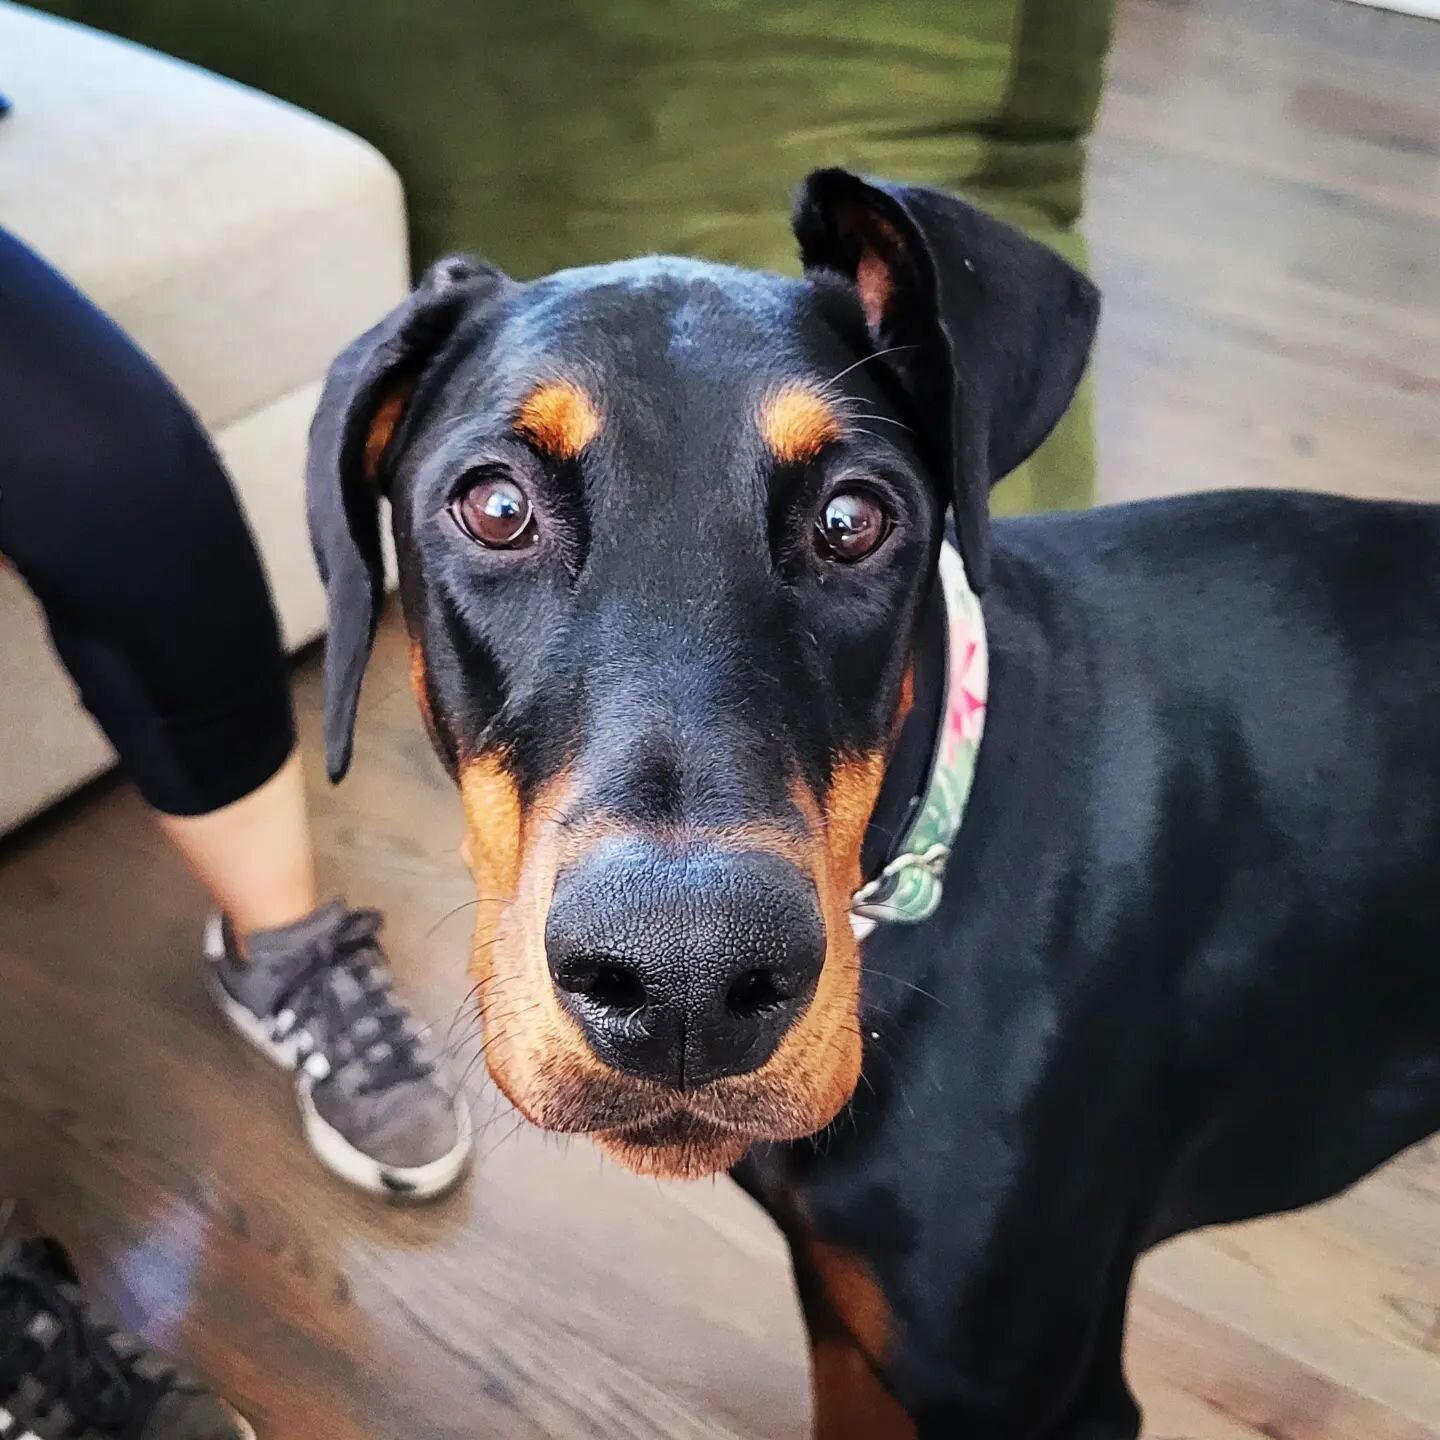 Just look at that boopable snoot! Say &quot;Hi&quot; to another beautiful flower, Daisy 👋🏻 

Daisy is a very young and active Doberman that doesn't always know her limits (who does when they're young, right?!). 

Her mama reached out to address bui